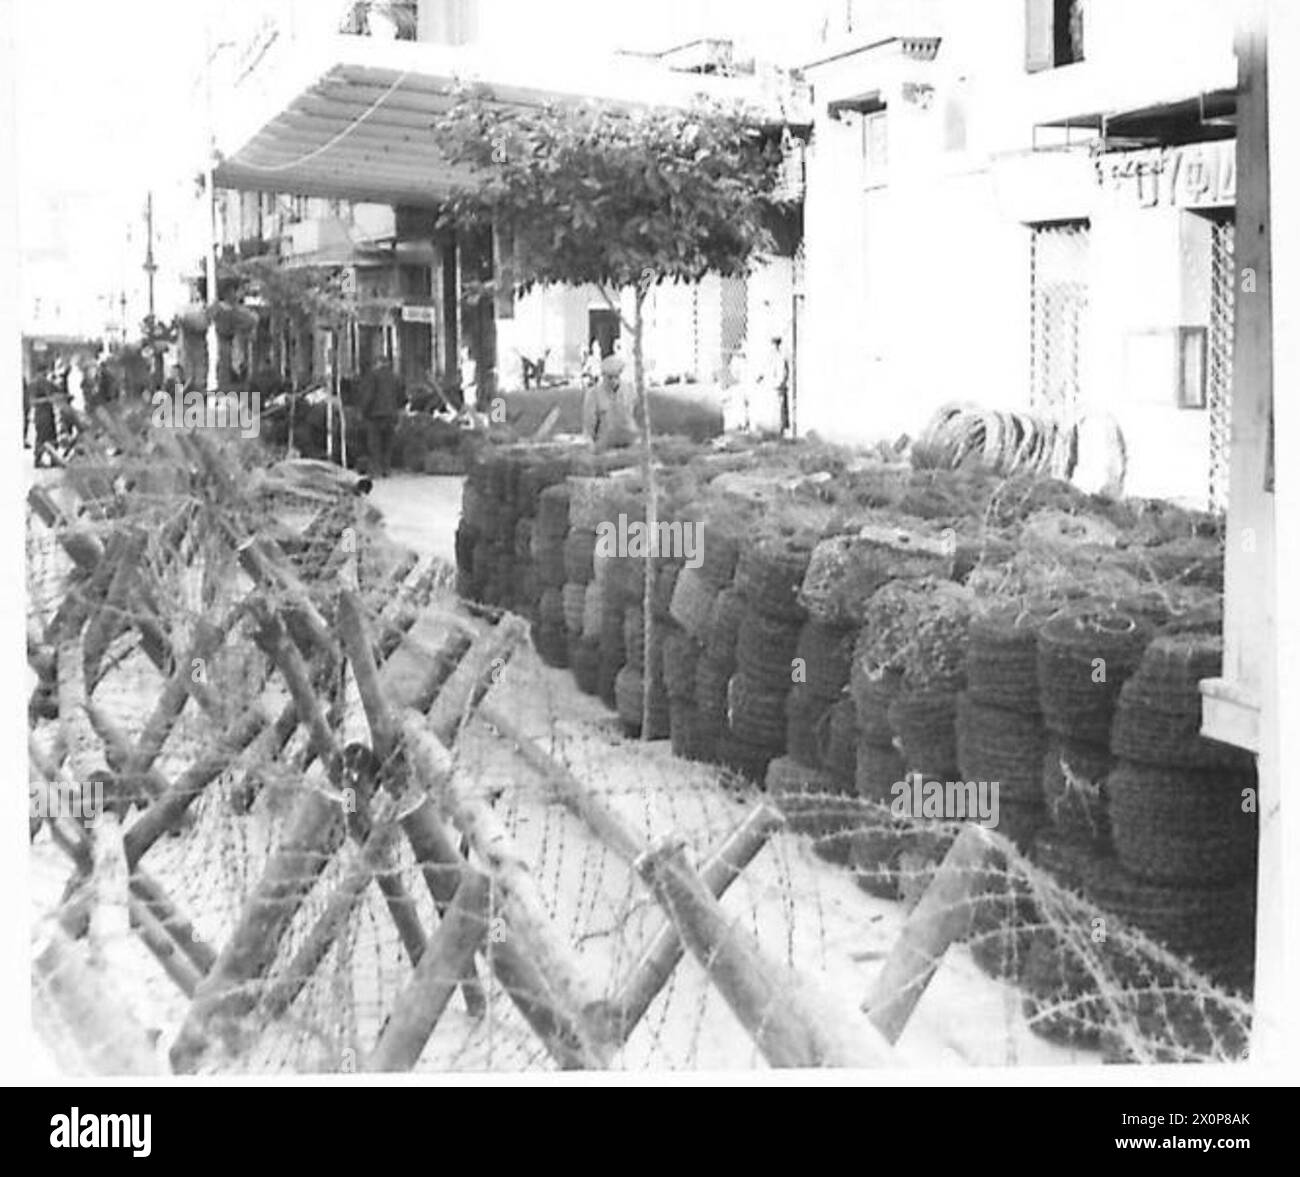 THE BRITISH ARMY IN NORTH AFRICA, SICILY, ITALY, THE BALKANS AND AUSTRIA 1942-1946 - Paratroops are constructing wire barricades to help in the defence of the British-held sector of Athens. Photographic negative , British Army Stock Photo